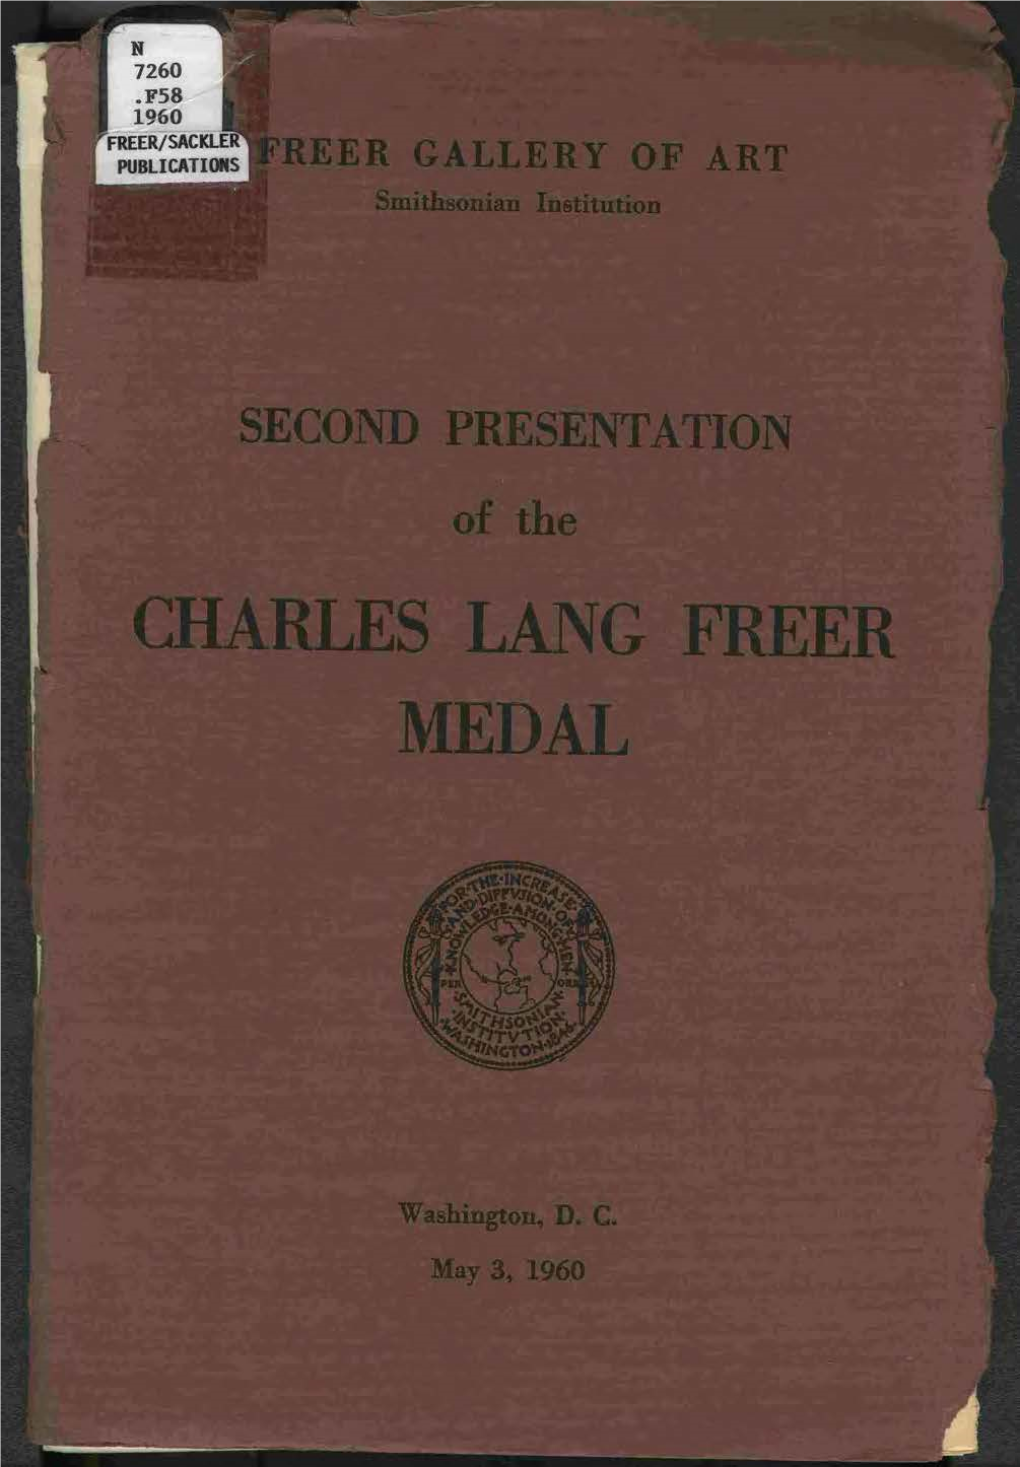 Second Presentation of the Charles Lang Freer Medal